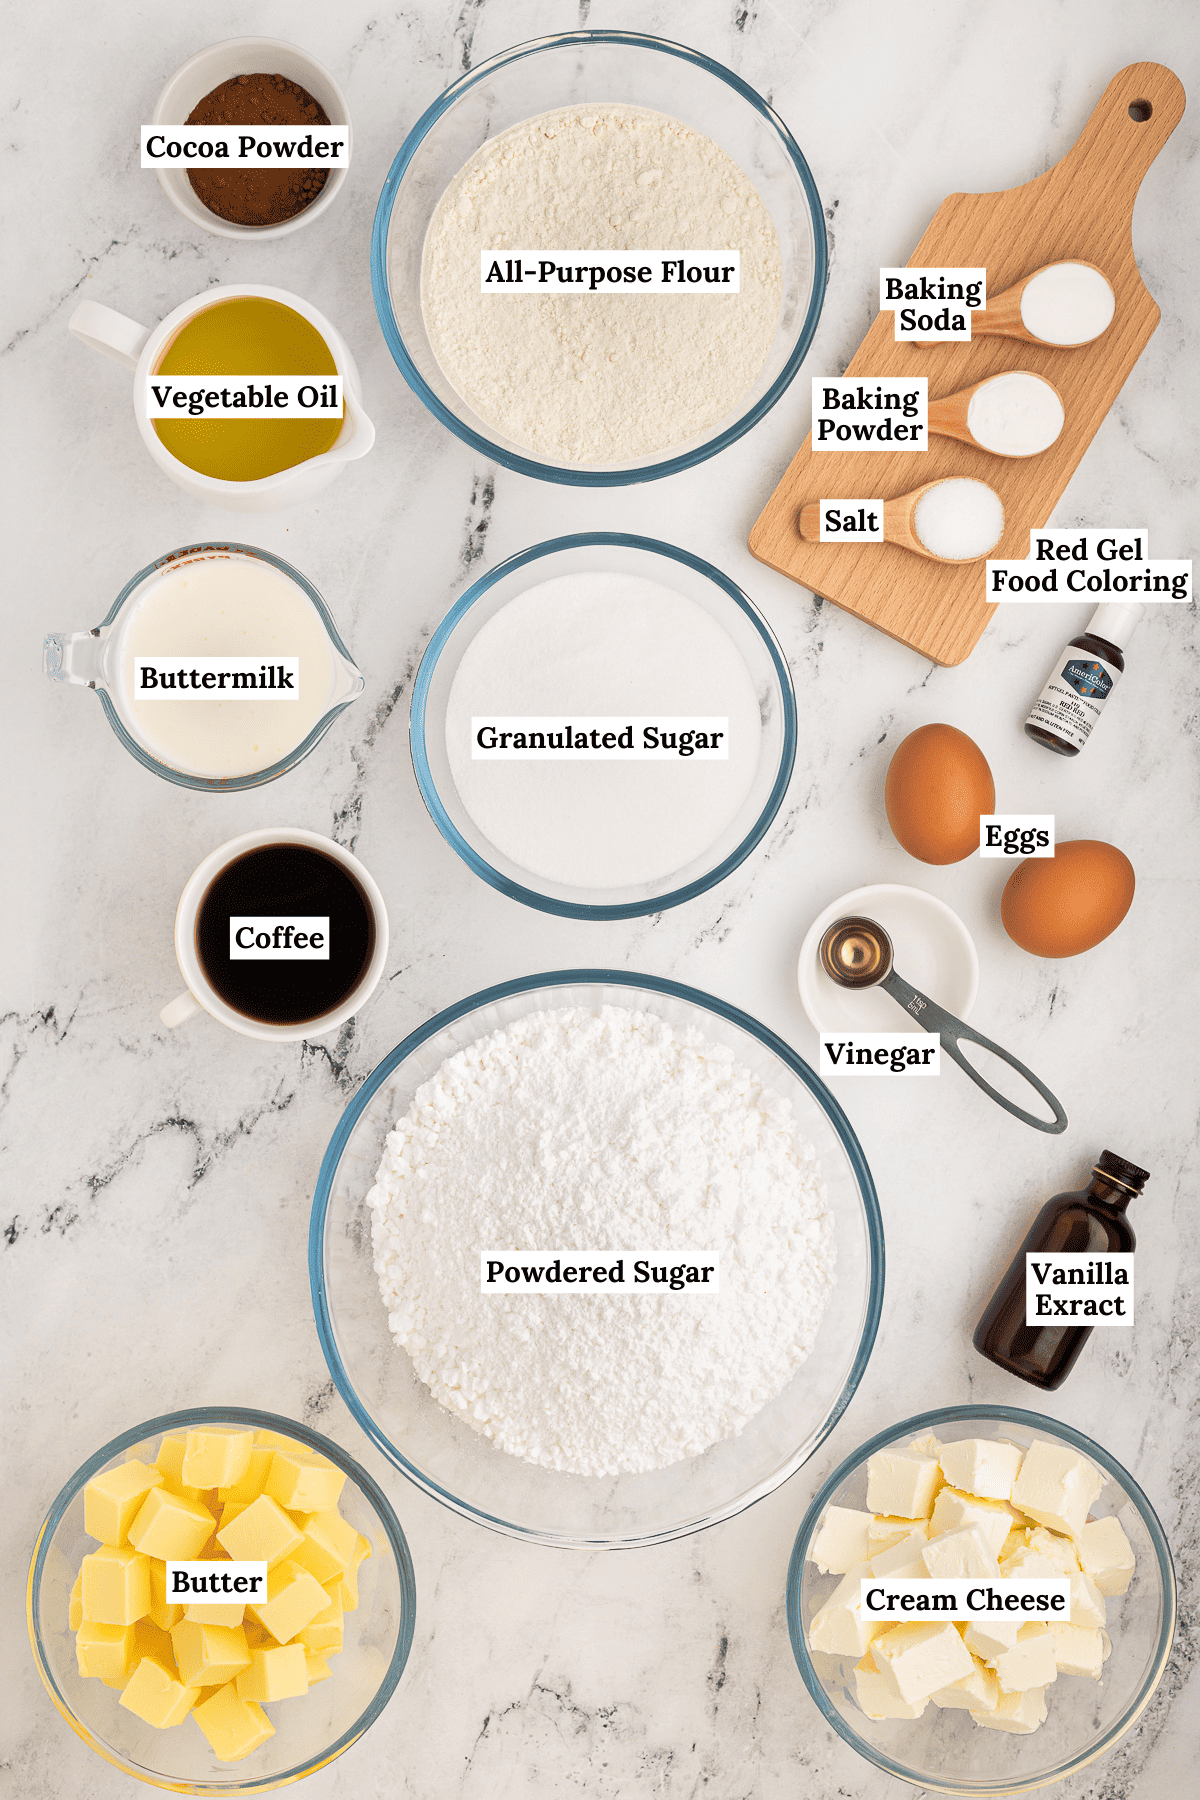 ingredients for red velvet cake arranged around each other on a counter including All-purpose flour, Dutch-processed cocoa powder, Baking soda, Baking powder, Salt, Granulated sugar, Eggs, Buttermilk, Vegetable oil, Vanilla extract, Red food coloring, Distilled vinegar, Instant coffee granules, Unsalted butter, Powdered sugar, Vanilla extract, and Cream cheese